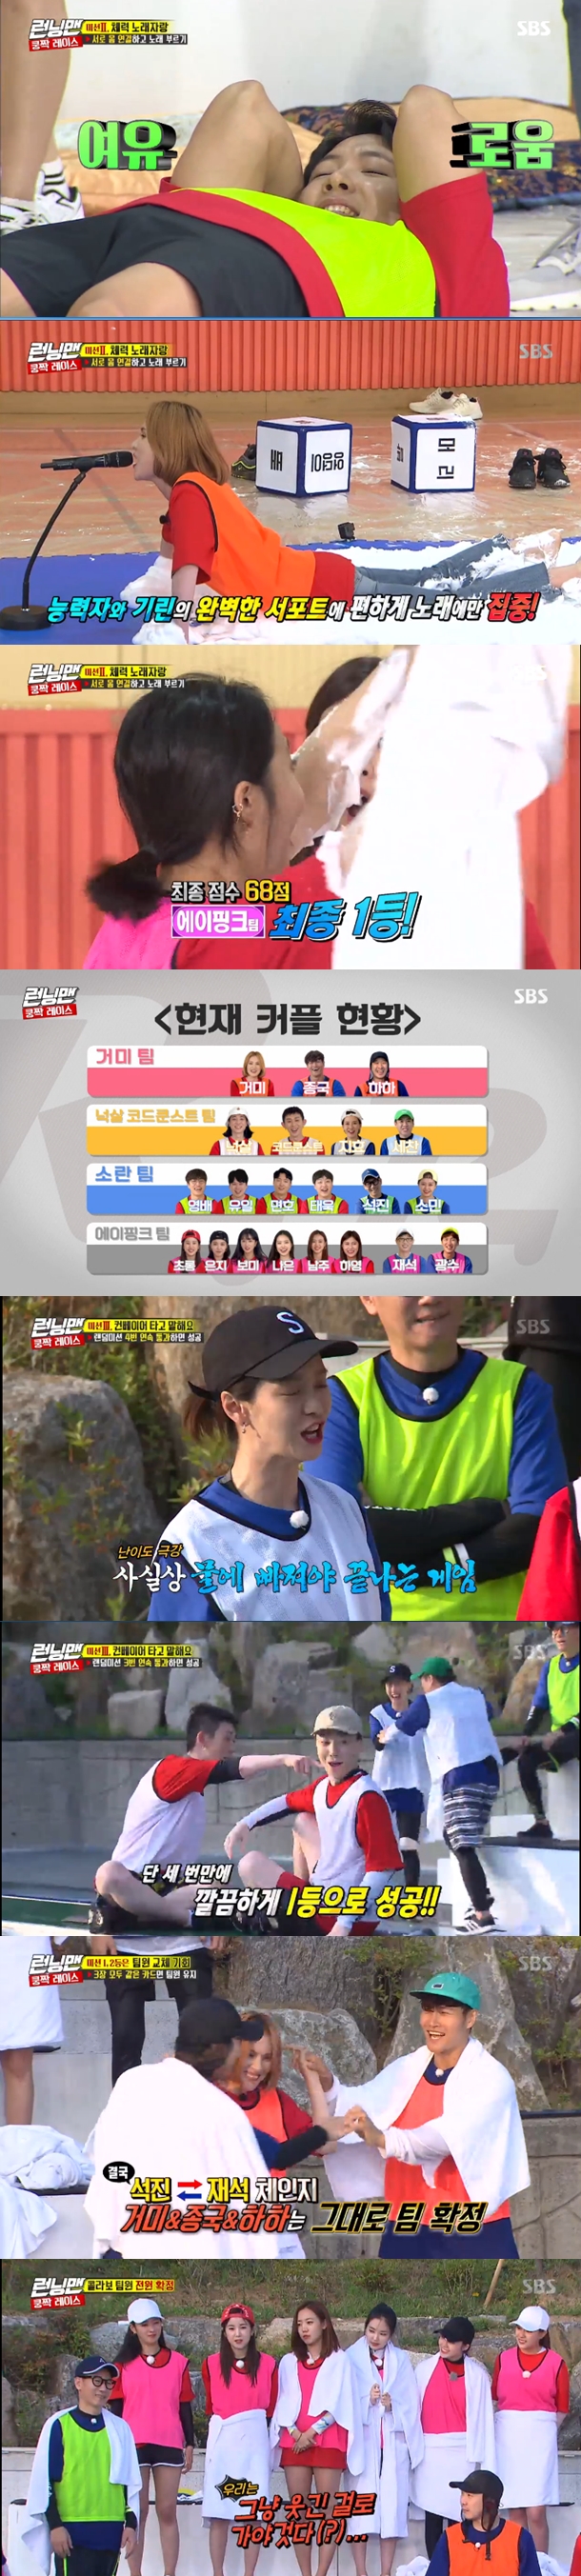 Four teams to be on the colabo stage have been confirmed.In the SBS entertainment program Running Man broadcasted on the afternoon of the 14th, the members of the Running Man concert and the members on the collaborating stage were selected to choose their partners, The Artists.Last week, Apink and one team, Ji Suk-jin, became a team with Nuxal and Code Kunst through partner replacements.The members who arrived at the place where the second mission, Physical Song Proud, spoke about their teaming with the new The Artist.Yoo Jae-Suk asked Nipsal and Cod Kunst, who became a team with Ji Suk-jin, about their current mood.The code kunst told me not to speak, he laughed at the disclosure of the code kunst.The struggle to start the physical song pride and the new partner Yang Se-chan showed the overwhelming game ability with FM appearance.In the game, where the designated body part had to sing without being closed to the ground, the disturbance surprised everyone by showing no confusion until the end of the song.When the song was over and the crew announced that there was no deduction, Lee Kwang-soo laughed at the anger, saying, Its fun to put your face on the floor, what is this?The spider team, which was on the Top Model following the FM fuss team, also impressed all teams with the performances of Lee Kwang-soo and Kim Jong-kook.Kim Jong-kook, who was made up of exercise, sang comfortably with Lee Kwang-soo, who used a long giraffe while he was holding up.When I saw the spider singing in a stable state, I fell into song appreciation, saying, It seems to have come to the concert hall.But the spider focused on the song and put his hand on the ground and got a big score.The second round of the first round was won by the Apink team, which had a cool high sound even in the uncomfortable posture of Jung Eun-ji.Jung Eun-ji, who sang Tears by So Chan-hui, surprised everyone by singing perfectly while lying down.The Apink team scored 98 points to take first place, including a deduction; Apink sent Haha out with a team exchange and brought in Lee Kwang-soo.Lee Kwang-soo, who did not want to break up with spiders, laughed with a look that he did not like or dislike.The second-placed Suran team replaced Yang Se-chan with Ji Suk-jin.Kodkunst and Noxal, who sent Ji Suk-jin and received Yang Se-chan, laughed because they could not hide their suddenly brightened expression.Yang Se-chan was surprised, saying, I did not know Kordkunst was playing this well.I was playing a joke and laughing, but Ji Suk-jin told me not to do it, Codkunst said, laughing disclosure.Finally, the opportunity to change the team was given to talk on the conveyor.It was a game that won when all four Game were won with the production team while riding the conveyor belt.Kodkunst and Yang Se-chan, who became the first runners-up, were not successful.The two men, who have won three Game in a row, left the wall of the last color game and were looking for the next opportunity.The Top Model Apink team then stepped out as the Top Model, Namju and Lantern, called tank sisters.The two men had not yet learned the rules even when they were on the conveyor, and Yoo Jae-Suk, who watched this, encouraged them to get it, you are tanks.The two men, who were running ahead without retreat, eventually failed to commission.Unfortunately, all teams failed in the first period, and each team put a new Top Model and made a Top Model in the second period.Song Ji-hyo and Nucksal, who resemble each other, came out on Top Model with the expectation of everyone.But even after four years of following Song Ji-hyos way, he continued to fail and sought his next chance, followed by Lee Kwang-soo, Son Na-eun and the fuss team, who also failed with only a laugh.The crew relaxed the rules by getting three problems when the members continued to fail to succeed; nonetheless, the spider team and the Apink team failed to succeed.The four-year-old and codecunst team on the Top Model then succeeded perfectly and got both my team replacement and defense.The Top Model fuss team also succeeded and got the right to replace the team.The four-year-old Kodkunst team, who won the first prize, decided not to change the team. The team had a defense, so they confirmed the team.Ji Suk-jin and Jeon So-min, who were in the fuss team, agreed not to change the team, but Jeon So-min betrayed it and changed one team member.The disturbance team finally agreed to send Ji Suk-jin to the Apink team and receive Yoo Jae-Suk.Apink, who received Ji Suk-jin again, laughed to himself, saying, I have to go to funny.Ji Suk-jin also fell into disarray, saying, How many times do I have to change clothes?A week later, the members and four The Artists went into their first practice for the collaboration, each team choosing a song through a color matching process, raising expectations for the stage.